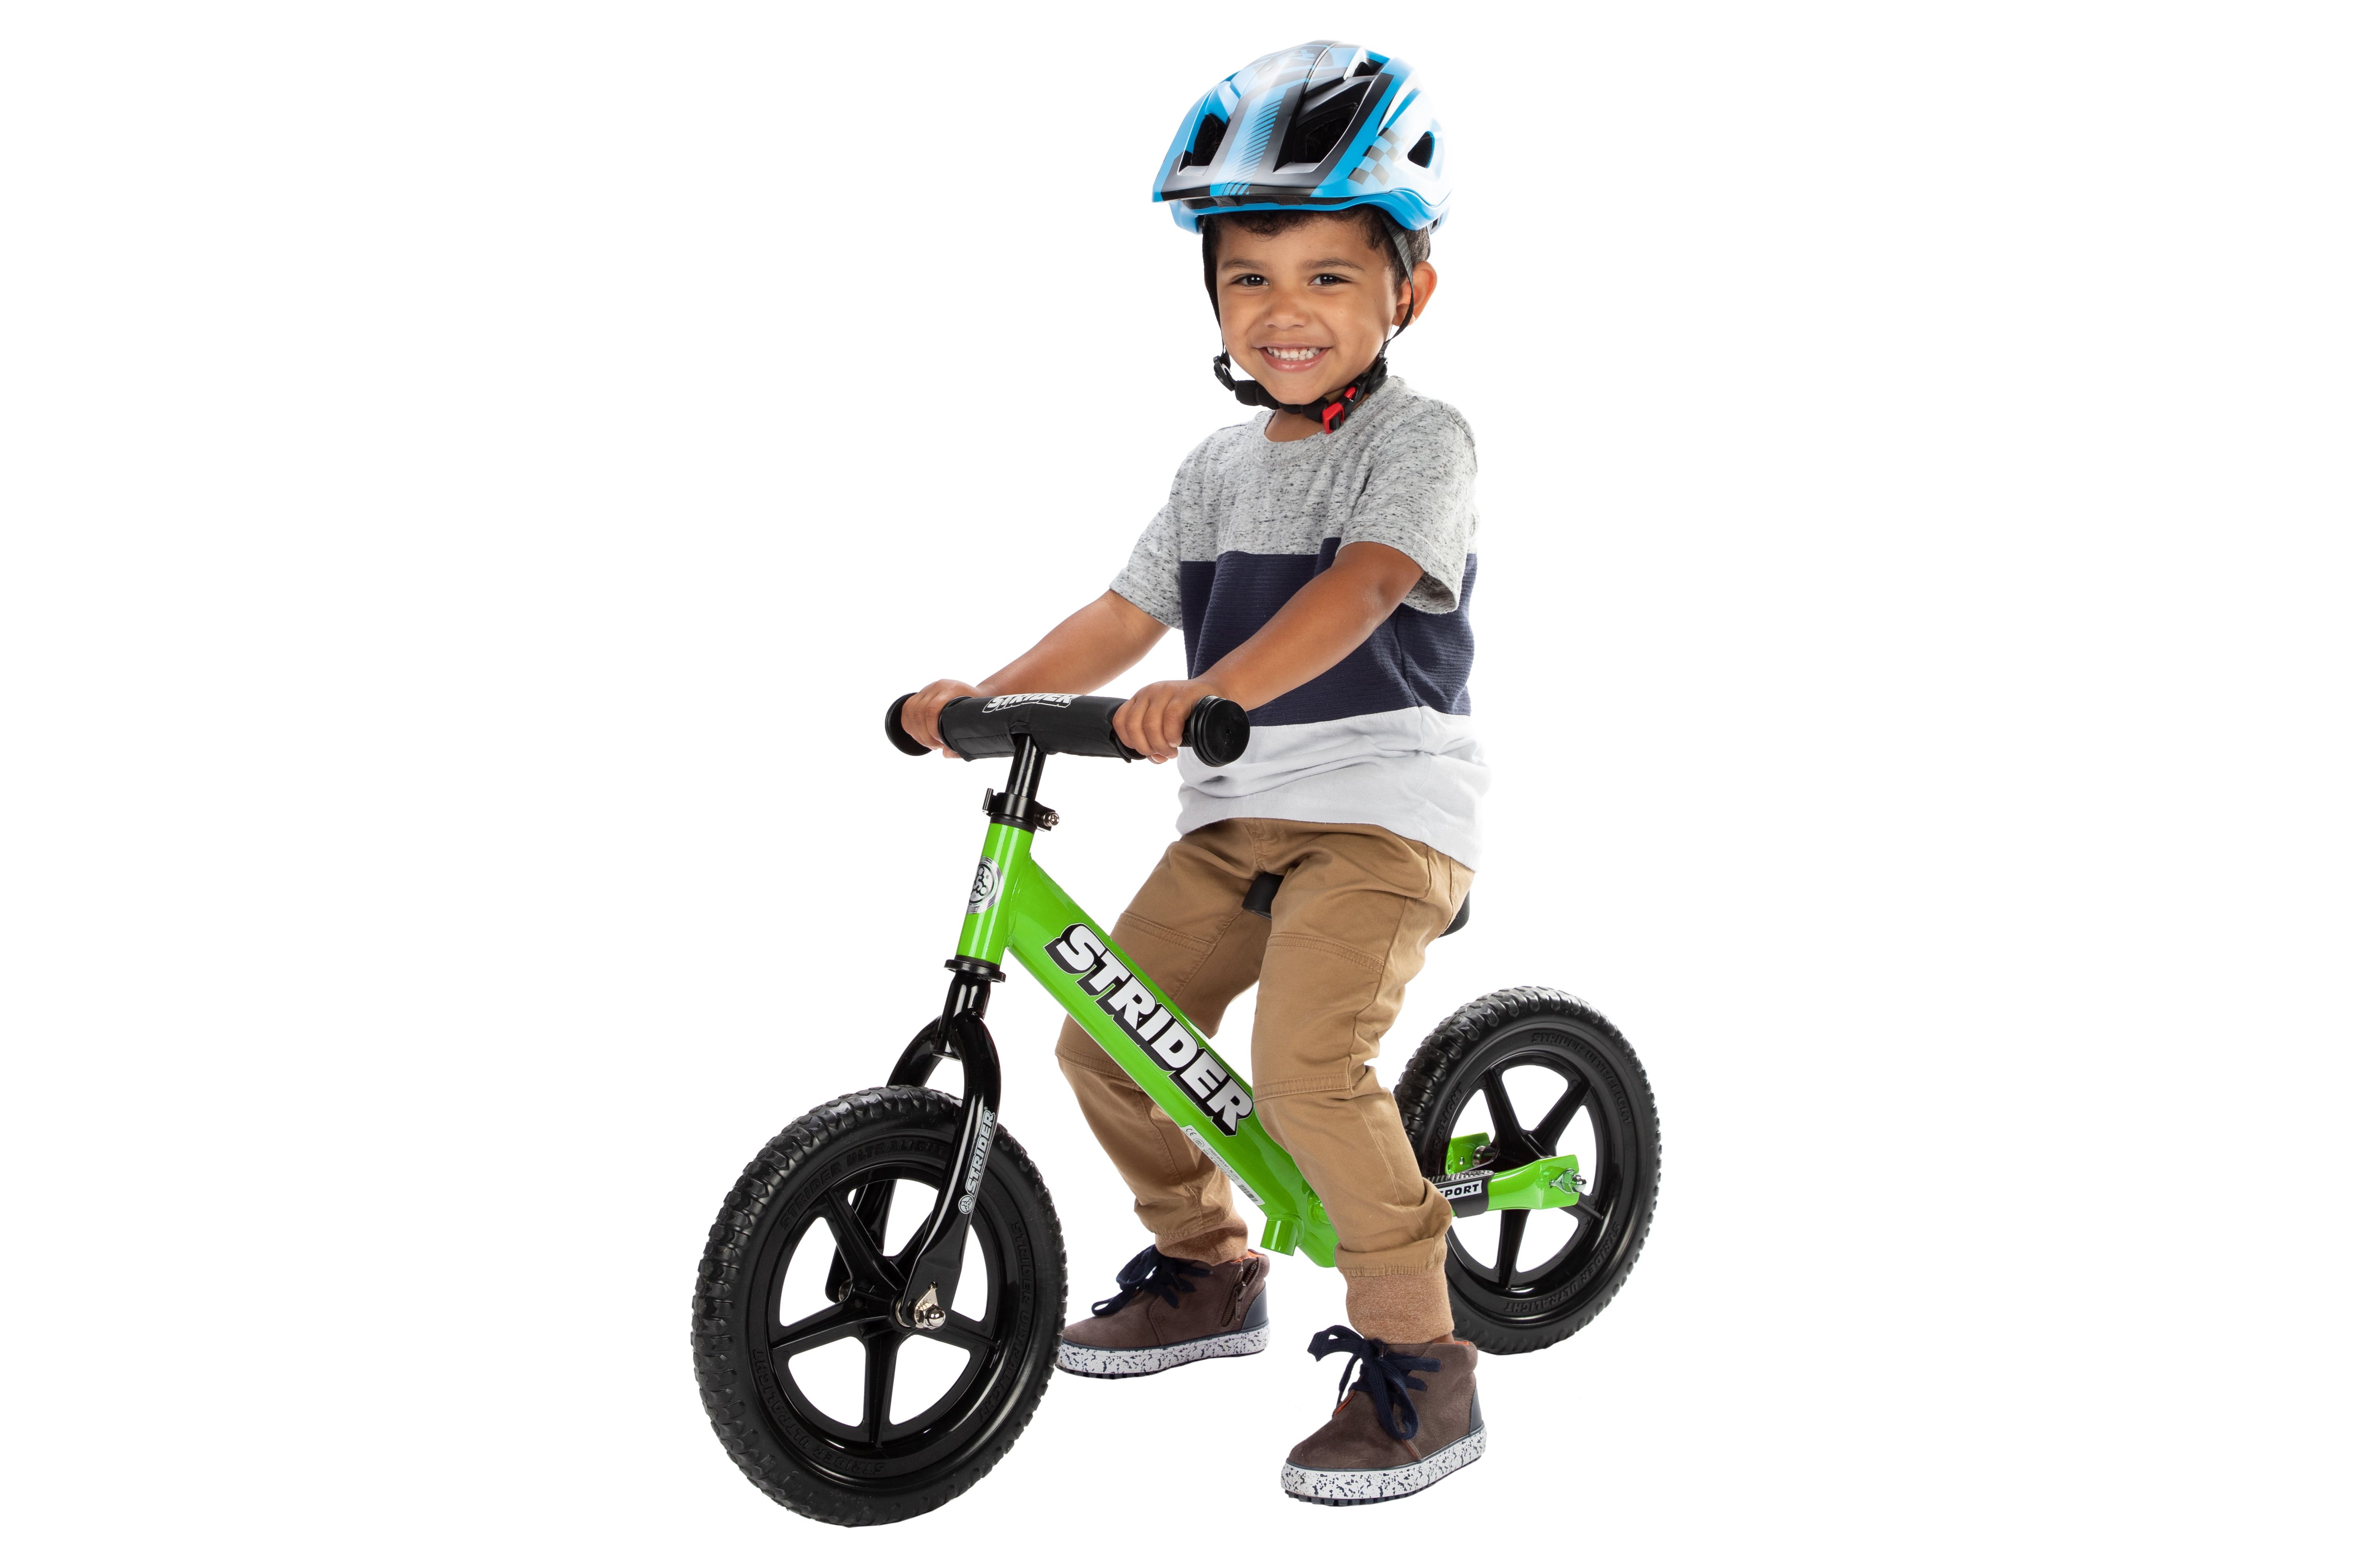 Strider - 12 Sport Balance Bike, Ages 18 Months to 5 Years - Green - image 3 of 14